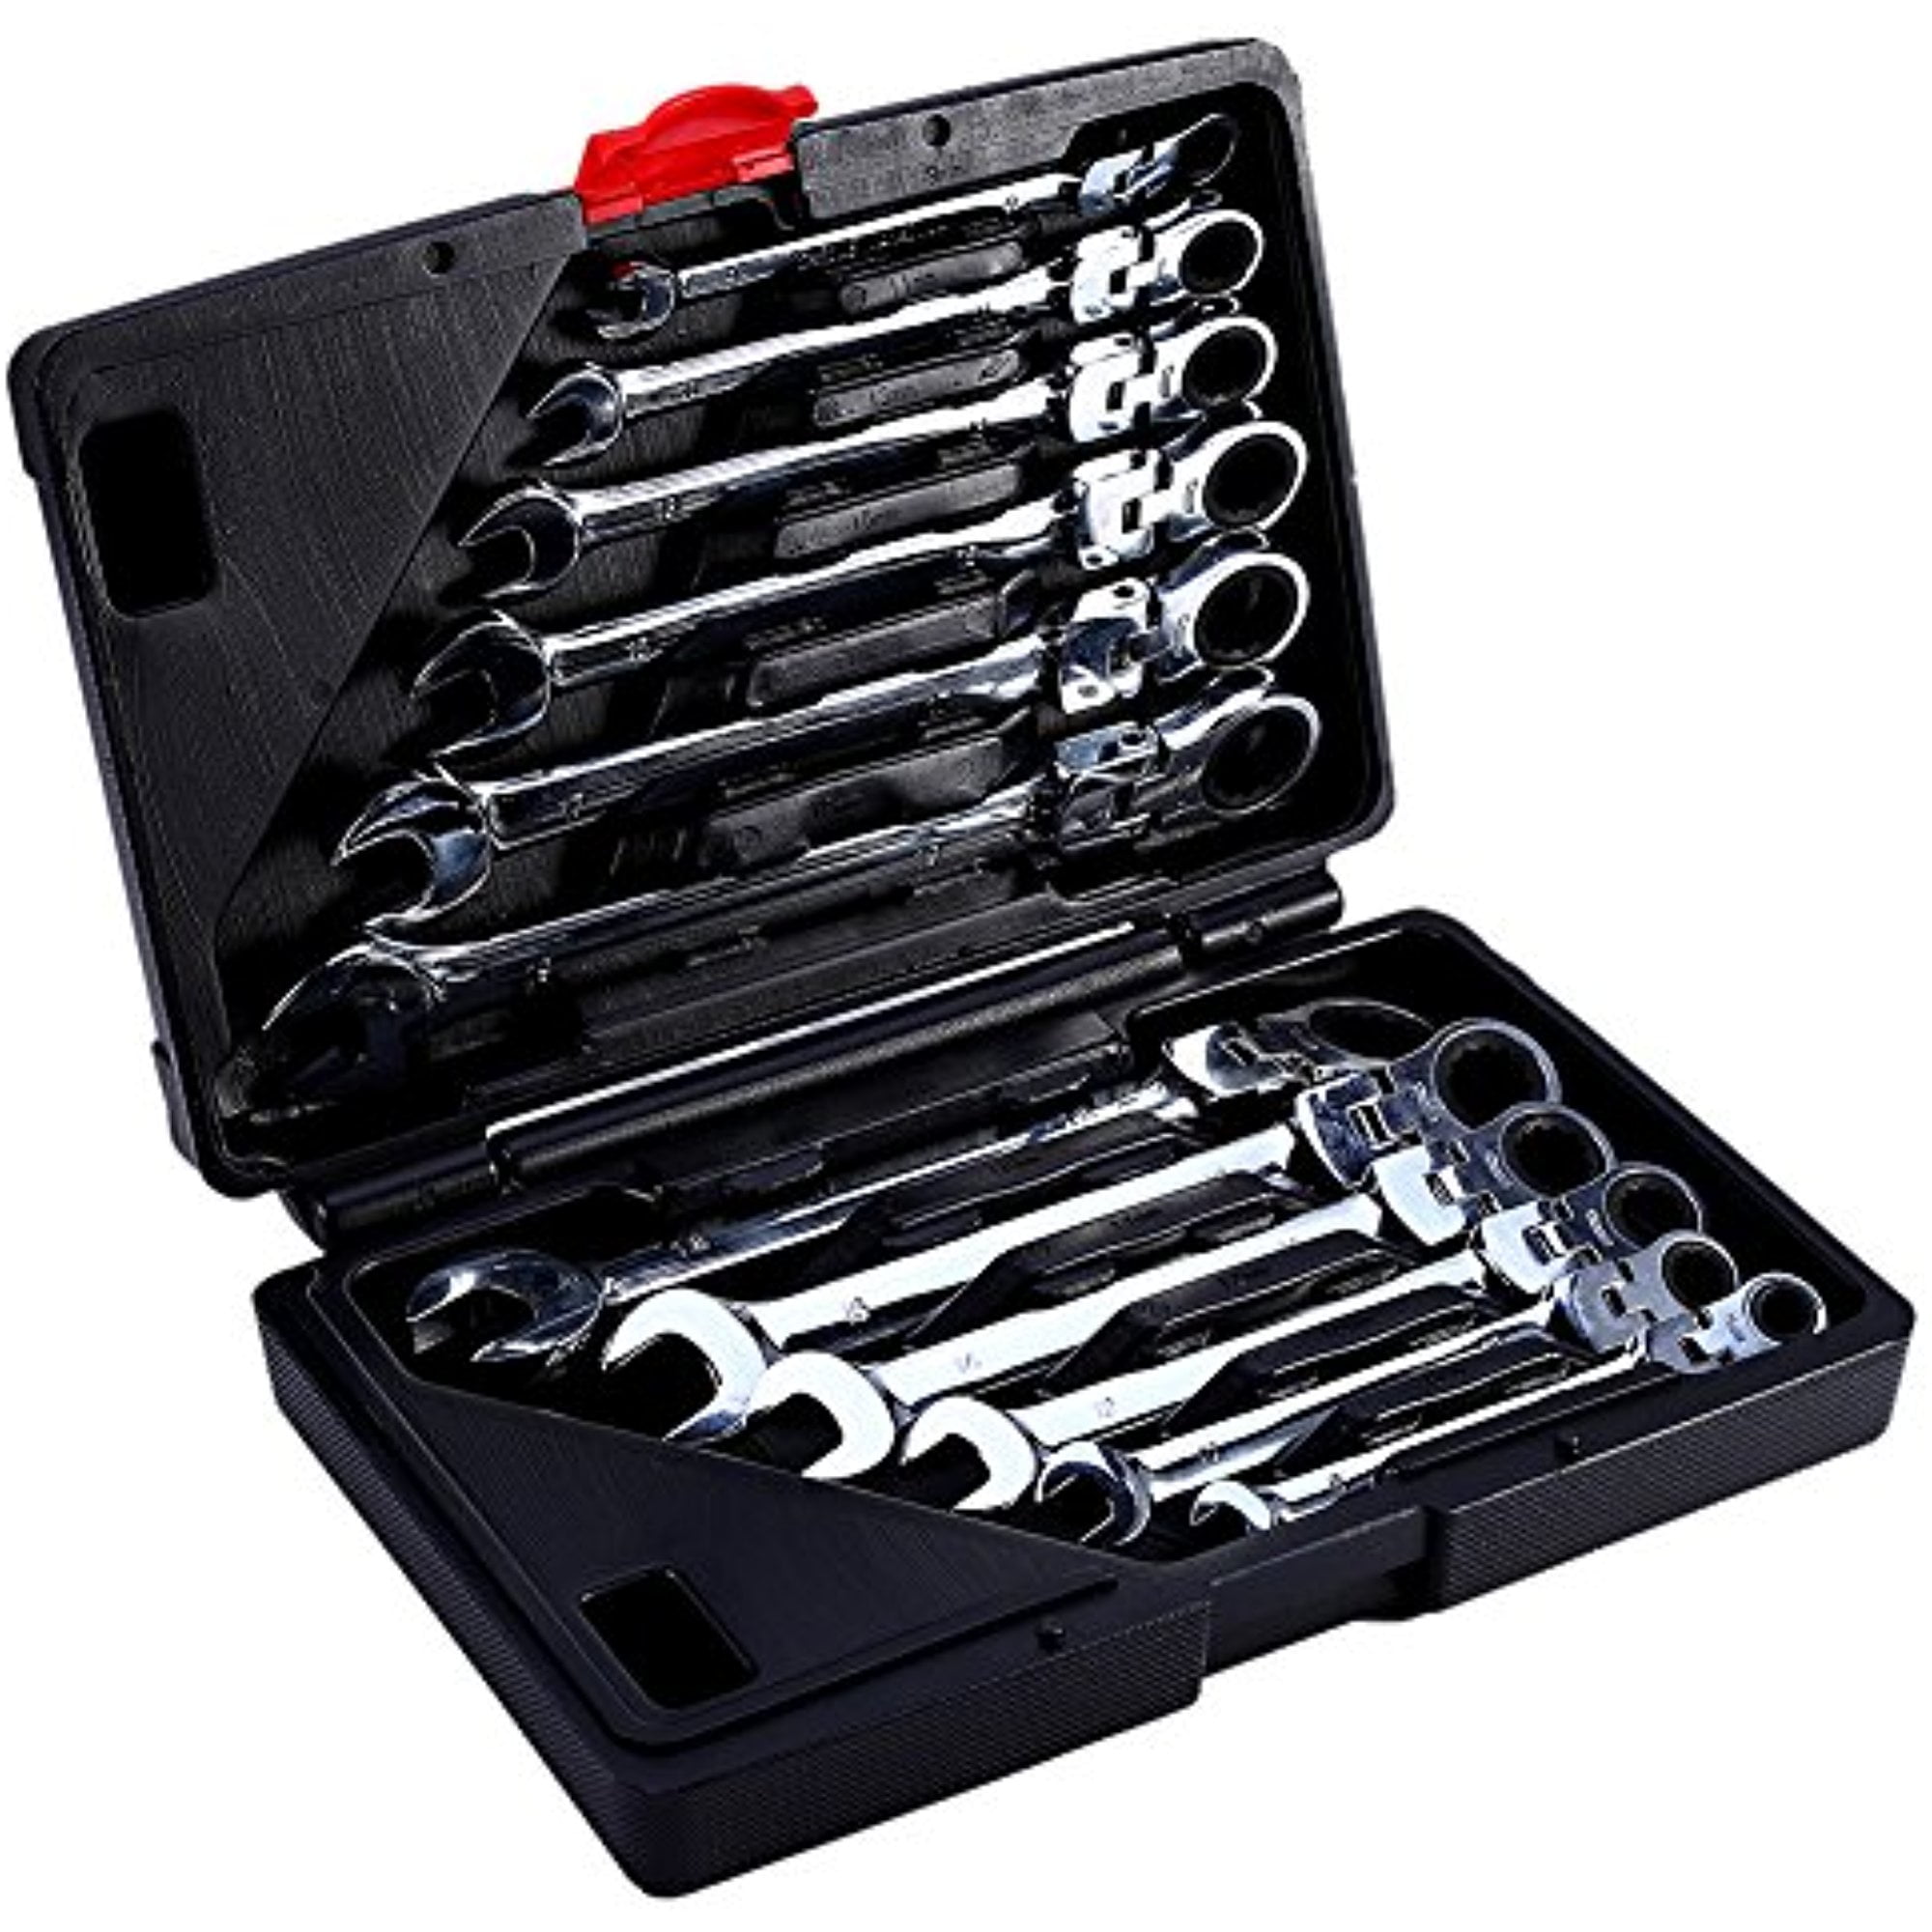 FAGINEY 12-Piece 8-19mm Metric Flex-Head Ratcheting Wrench Set,  Professional Superior Quality Chrome Vanadium Steel Combination Ended  Standard Kit with Portable Tool Case 